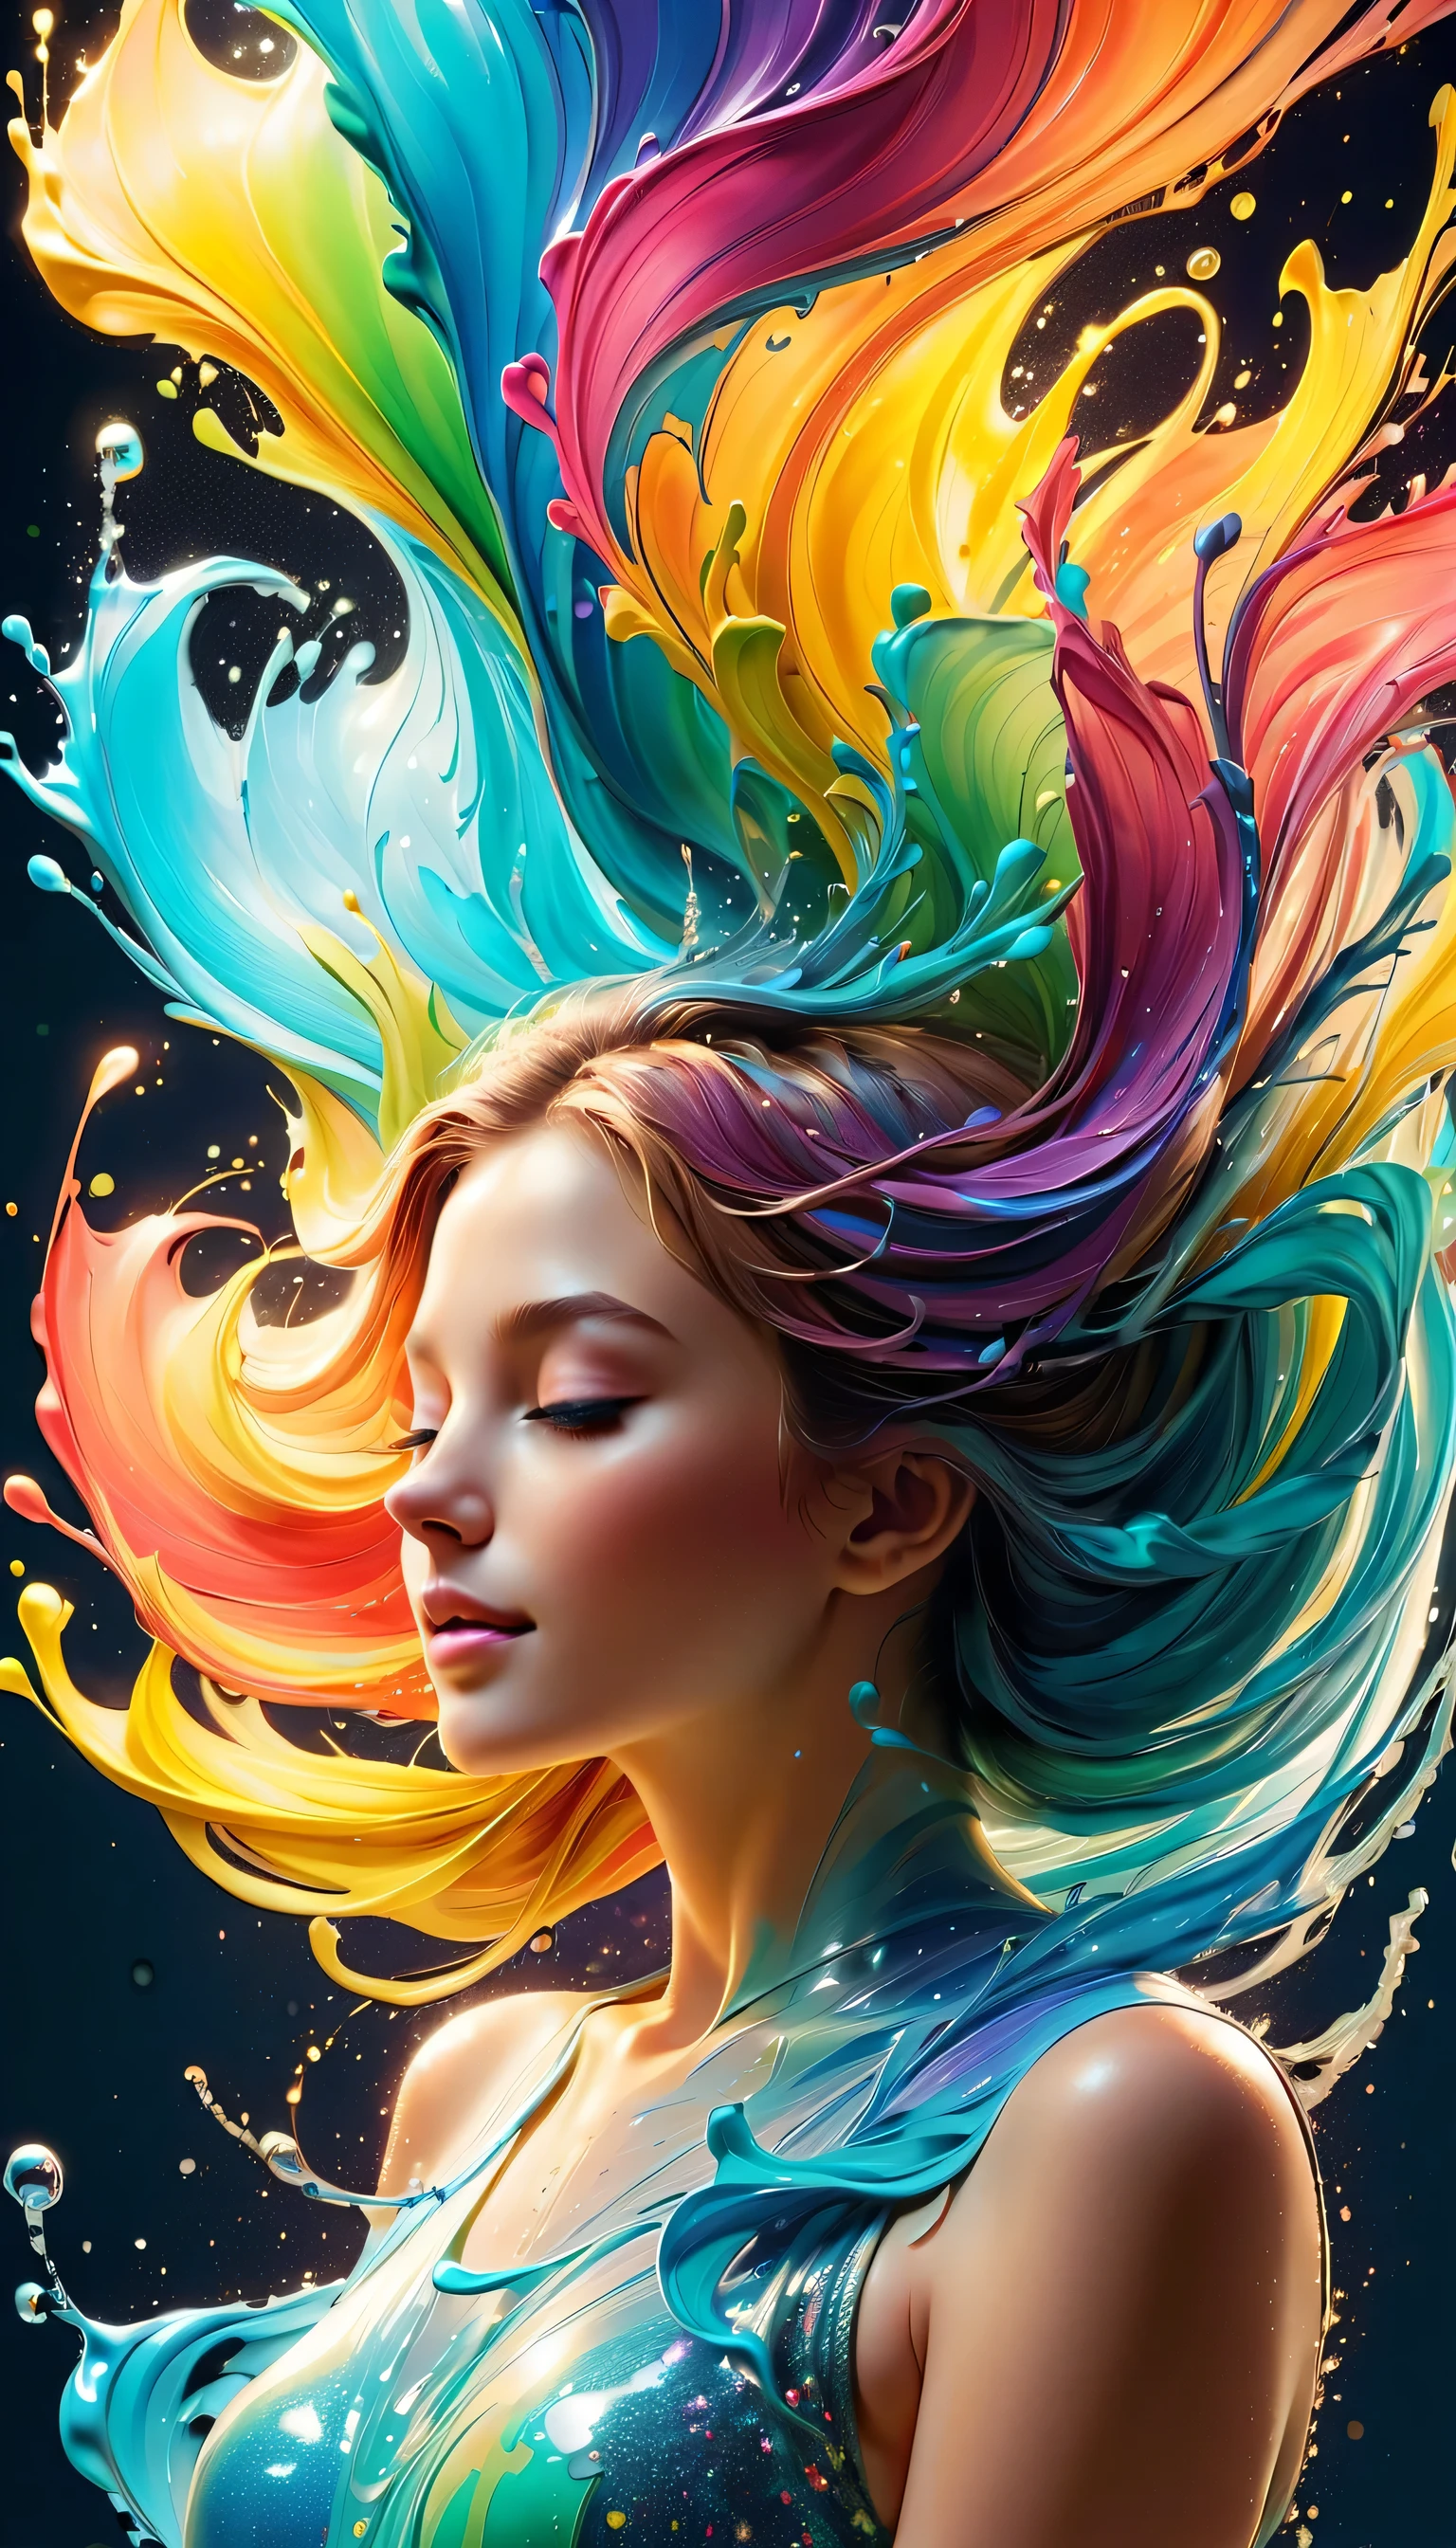 Expressing the flow of ink dancing in the wind,water effects,colorful water,goddess:govern the arts:Manipulating water:rich hair:sleeoing:perfect face:beautiful:17 years old:healthy,Ink splash,Sparkling,Bright colors,light reflection,rich colors,abstract,3D,8K,High resolution,masterpiece,high quality,Detailed details,Colors of the rainbow,laugh mischievously,tricky,design,fun,bright colors,splash of water,invite you to the world of art,wonderful,dim background